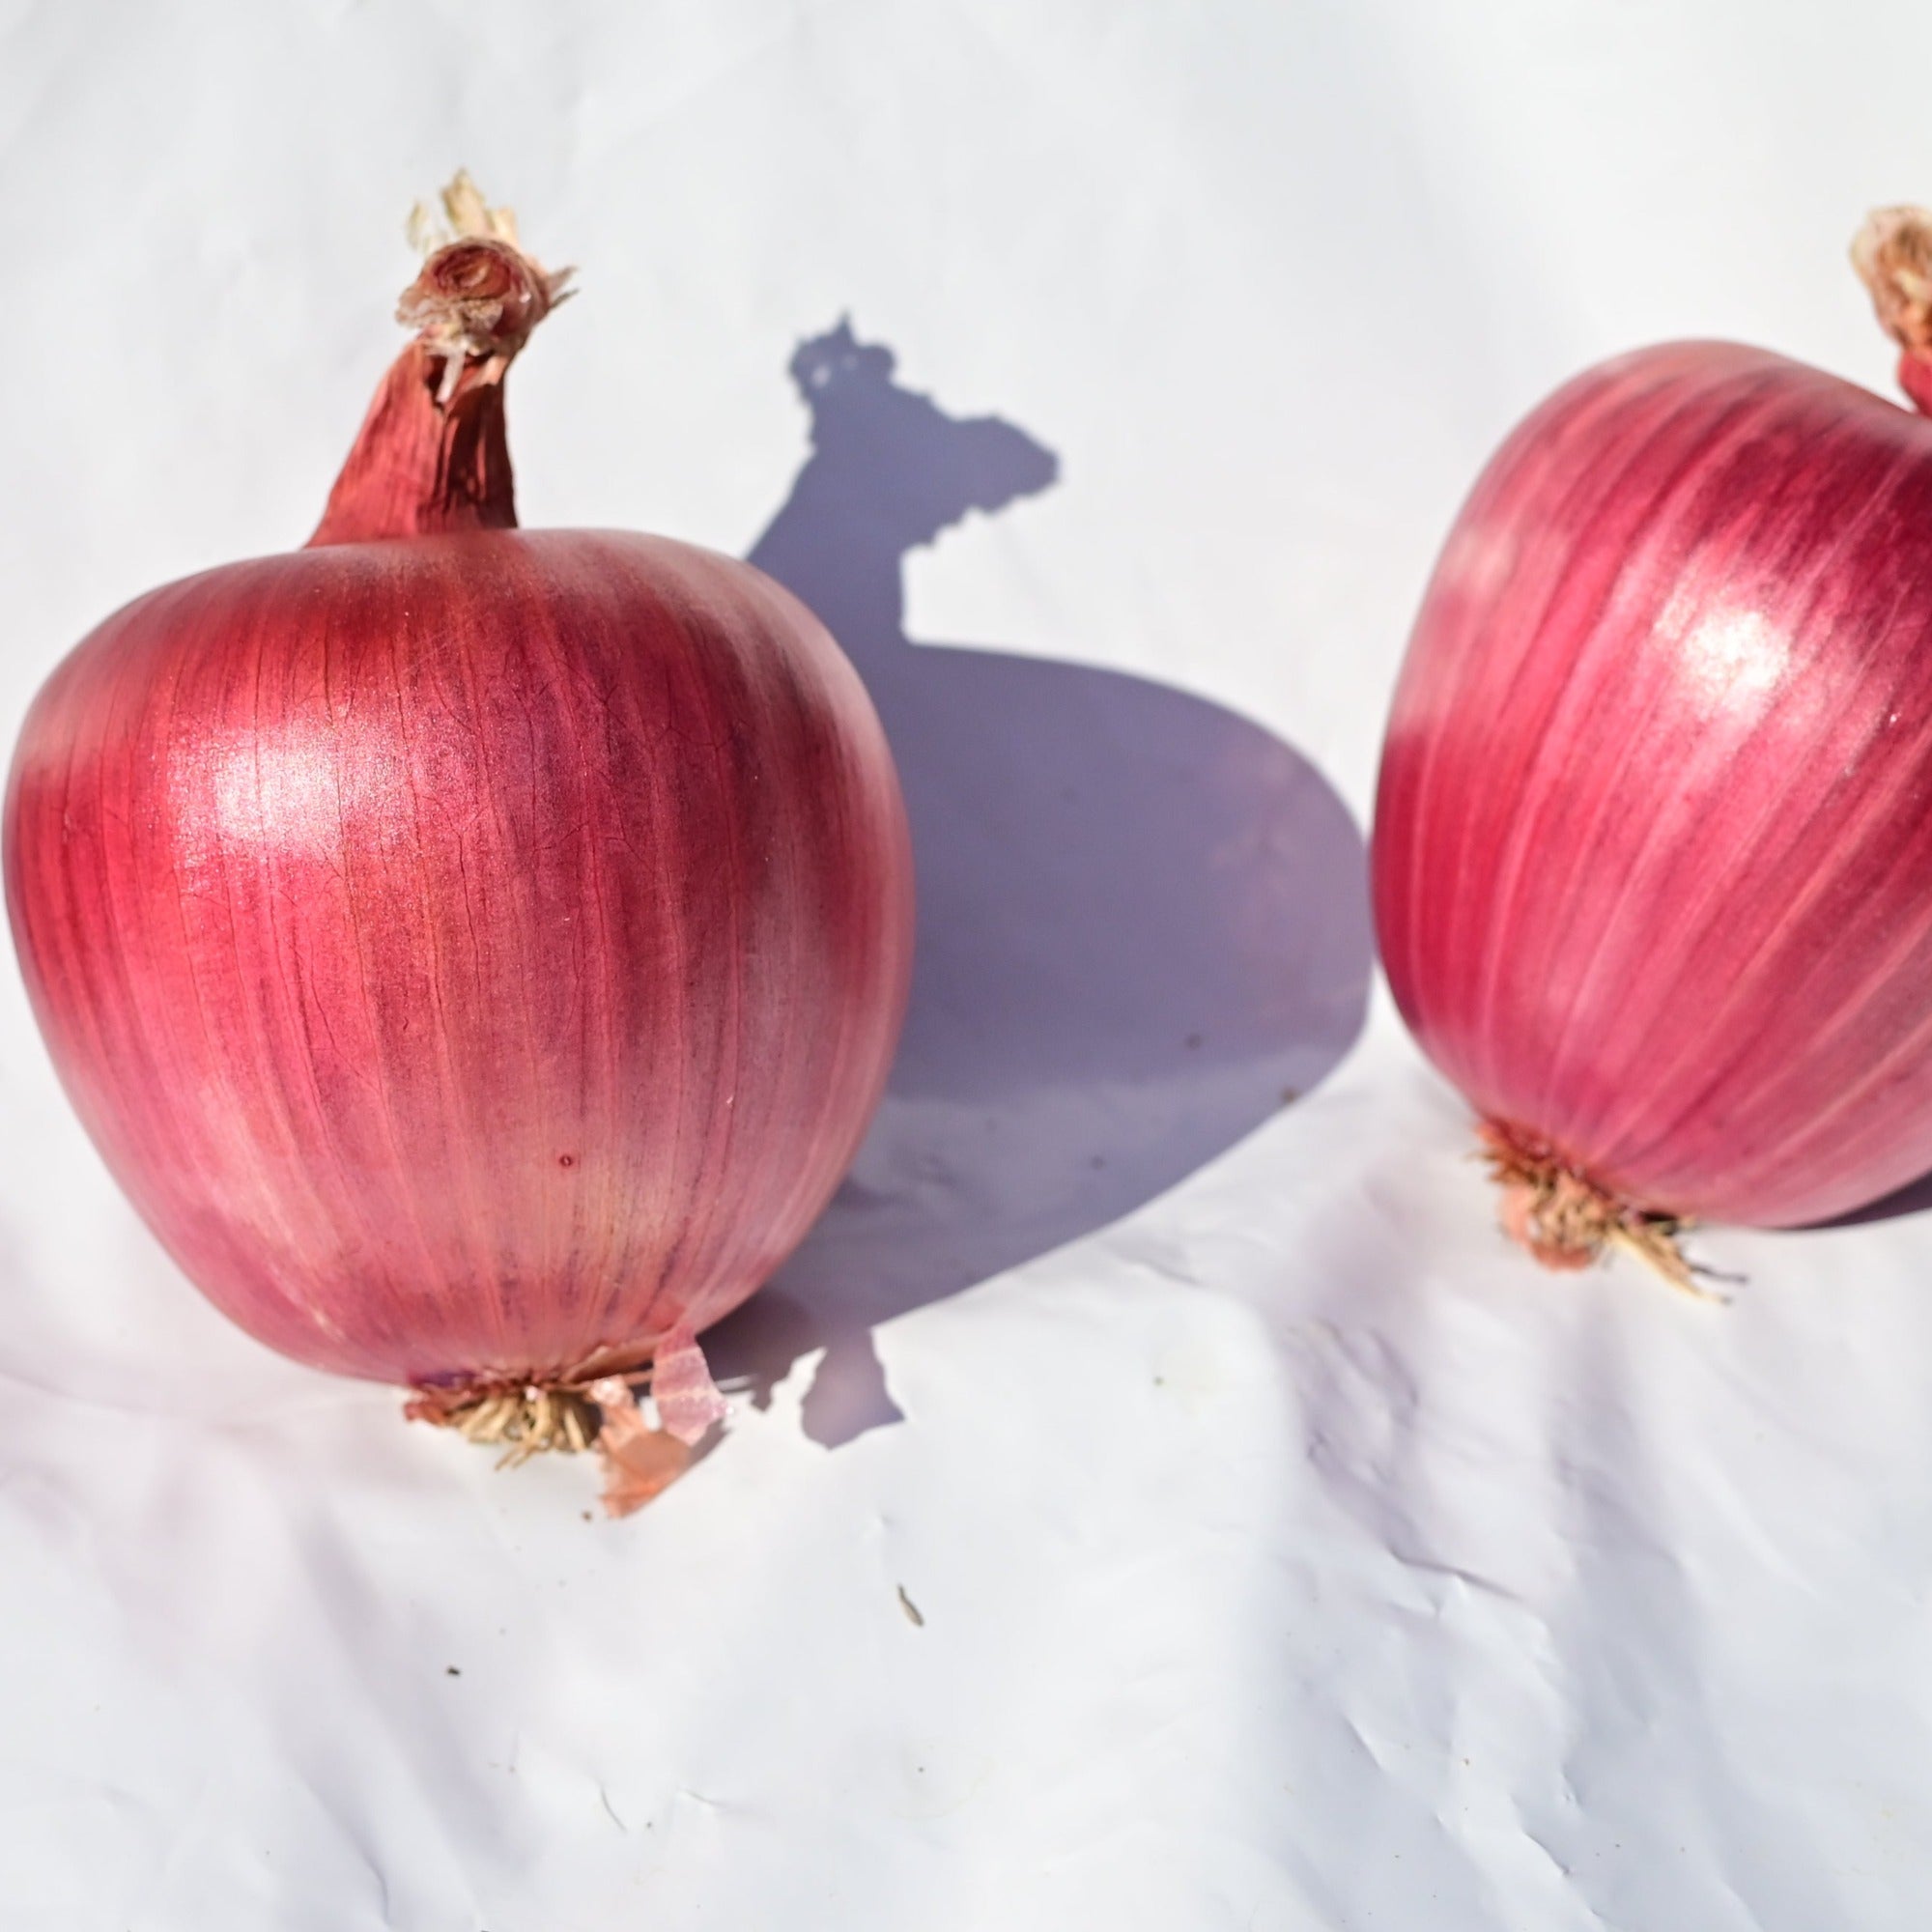 Two rossa di milano red onions against a white background